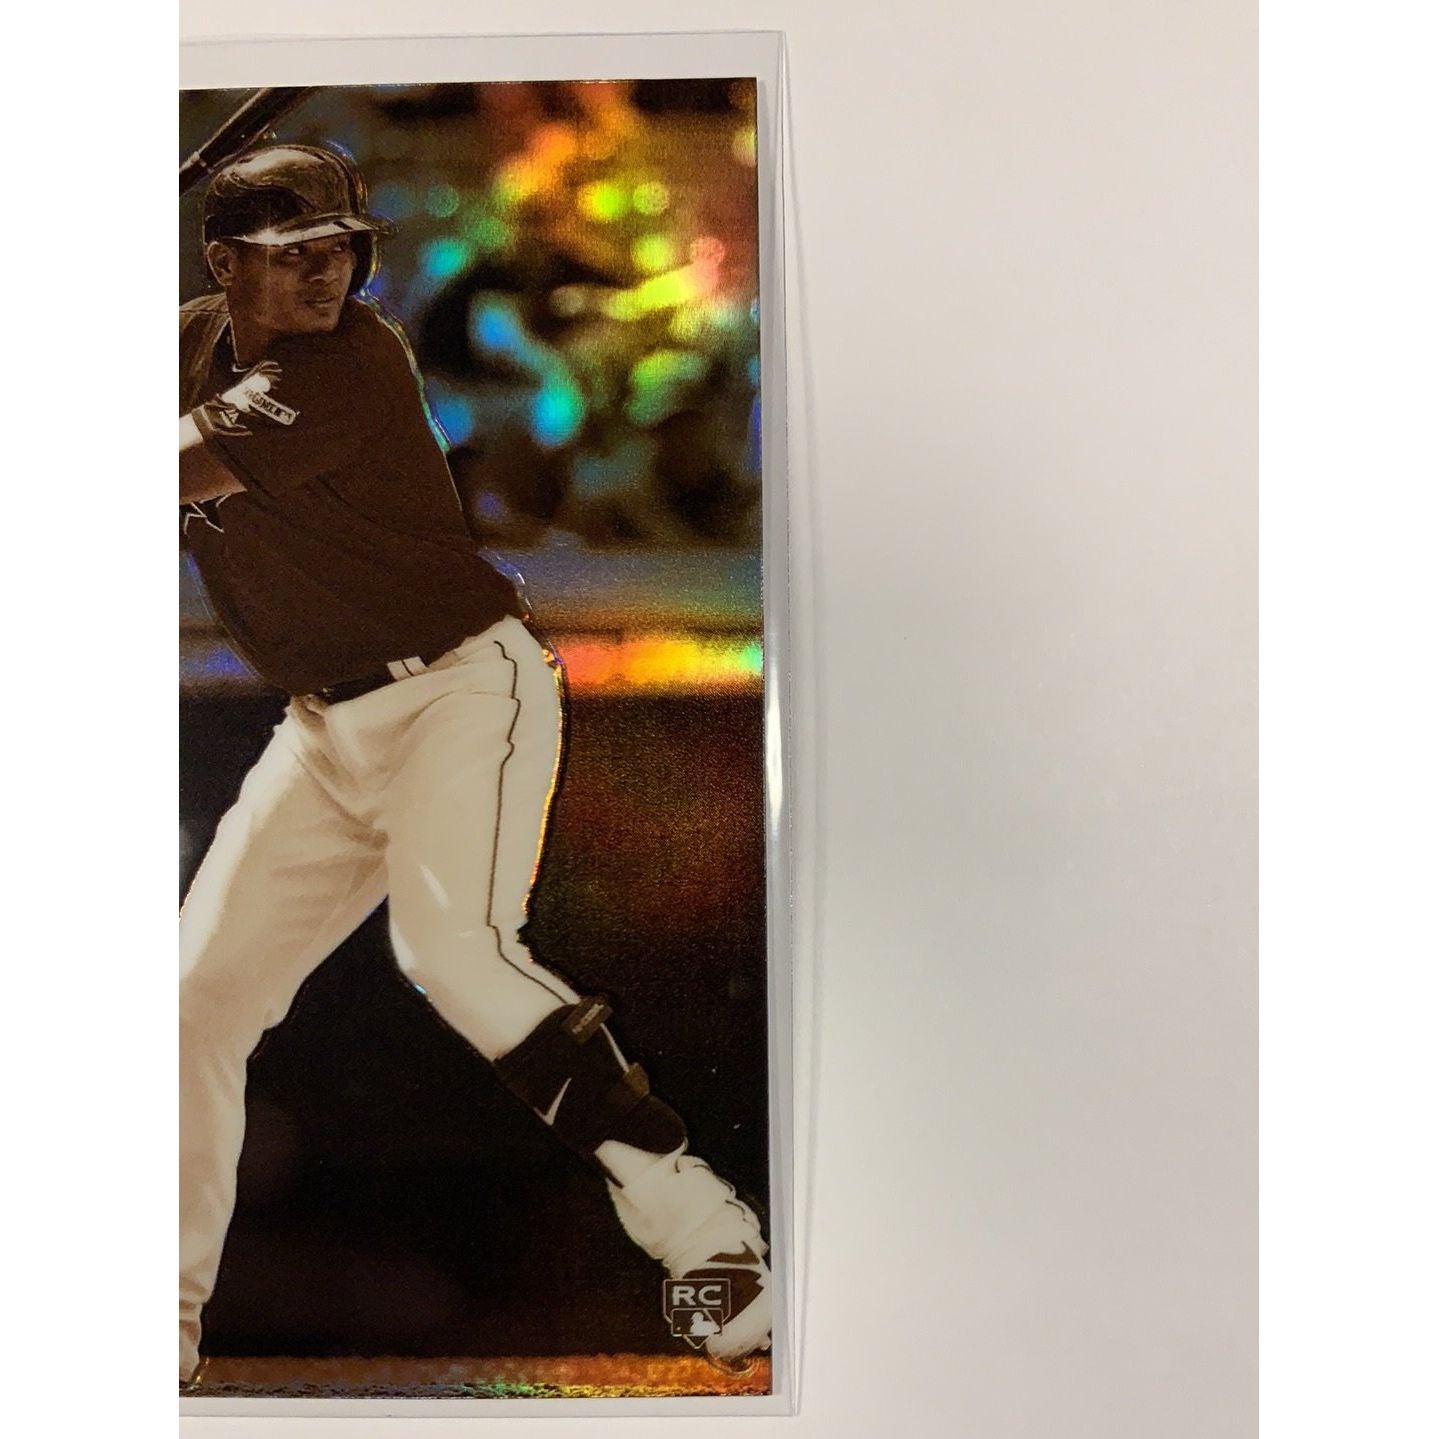  2020 Topps Chrome Yu Chang RC Sepia Refractor  Local Legends Cards & Collectibles